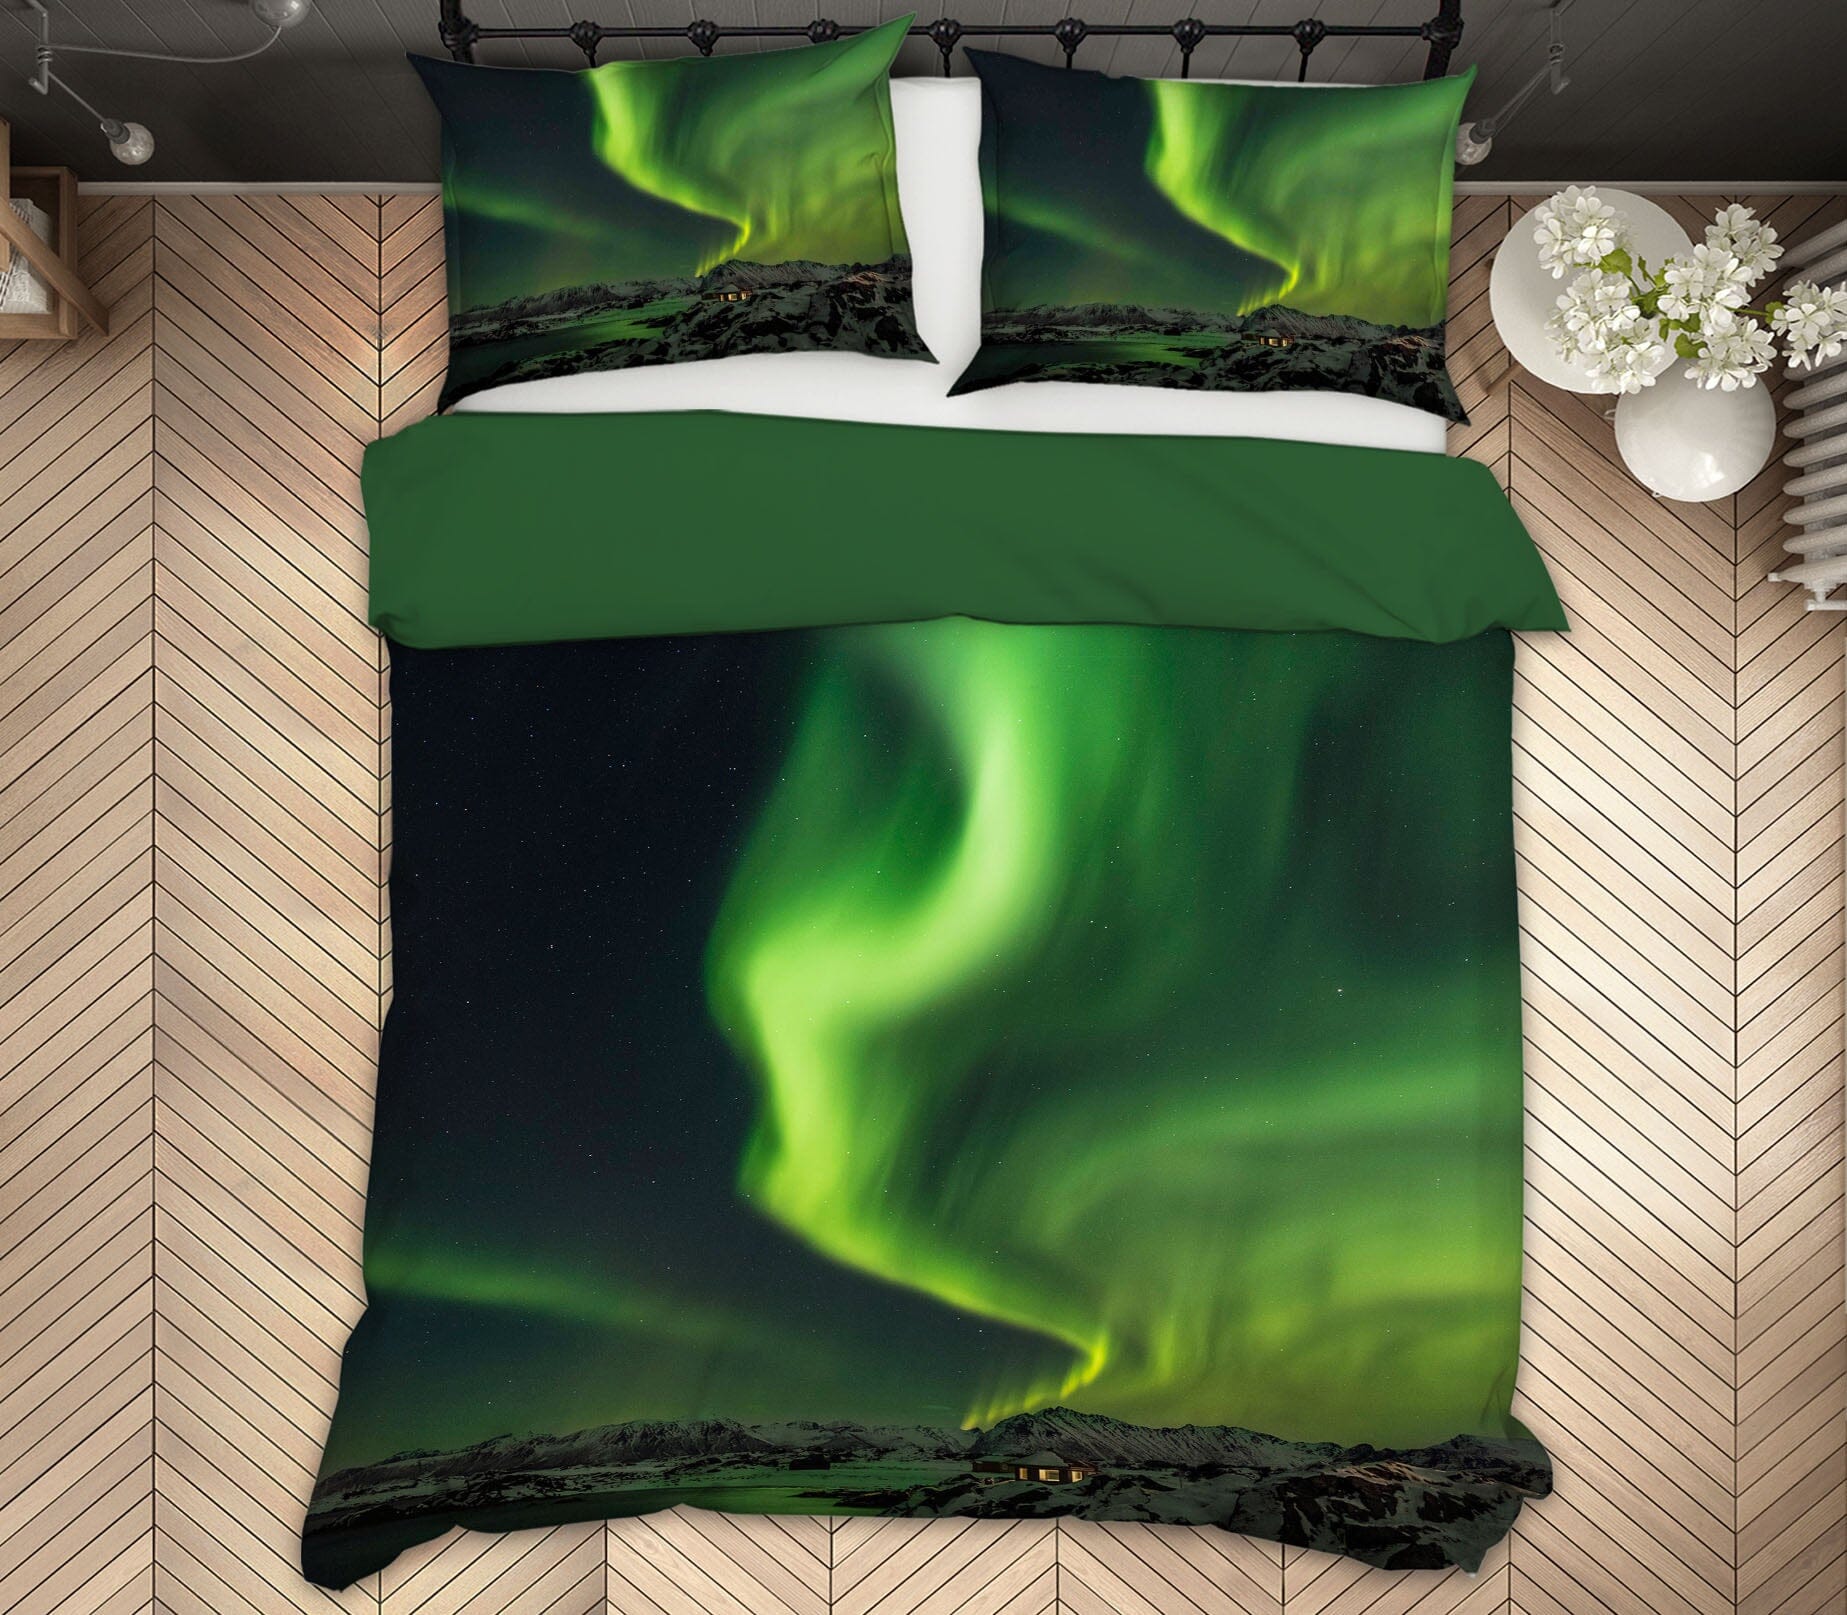 3D Green Light 2149 Marco Carmassi Bedding Bed Pillowcases Quilt Quiet Covers AJ Creativity Home 